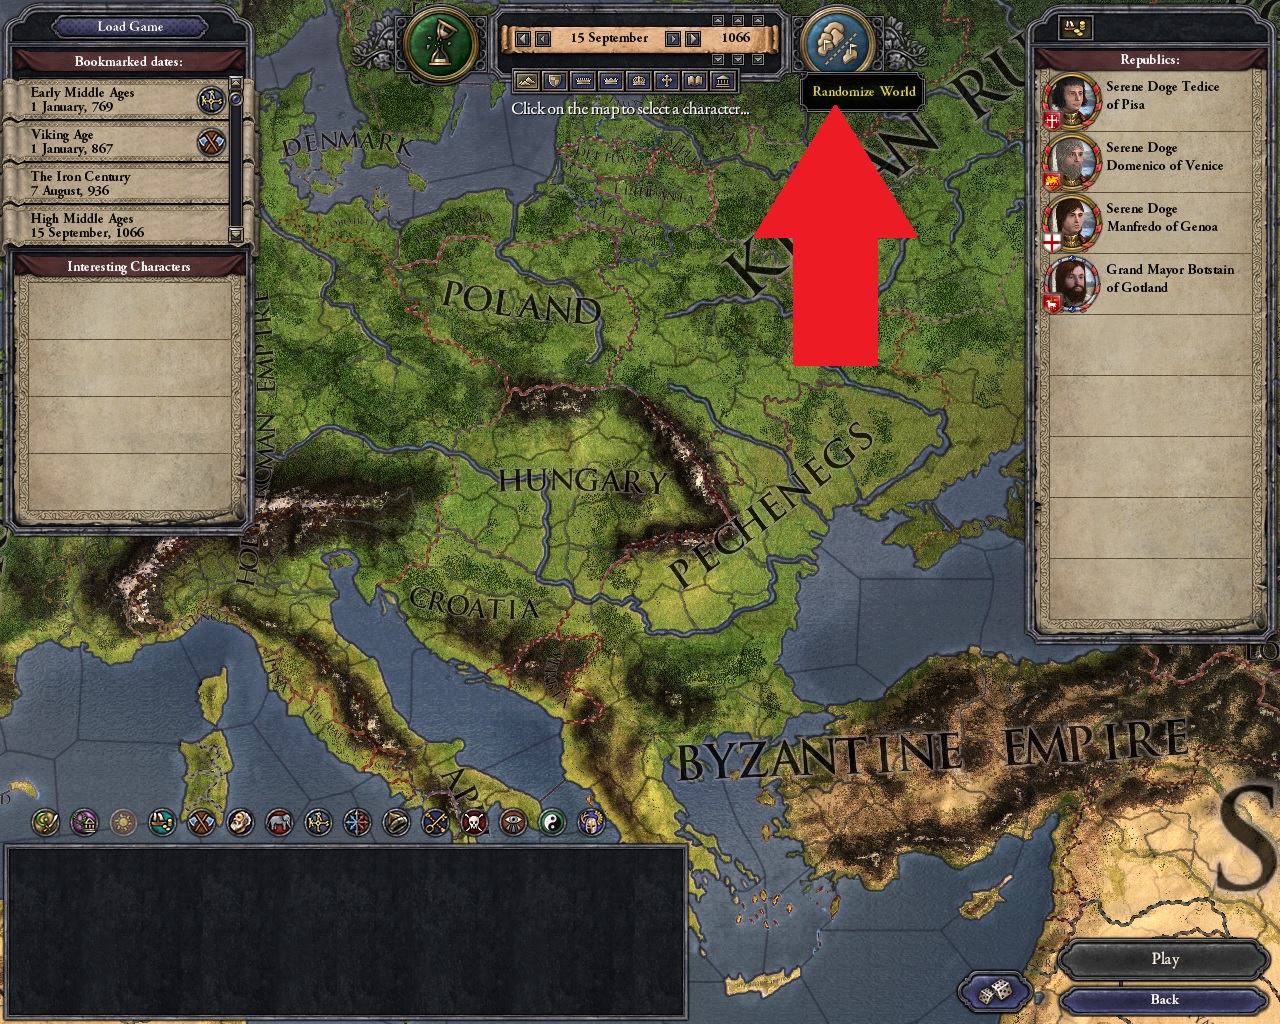 Crusader Kings II - How to Get Rare Achievement - Setting up the world. - 17580FB